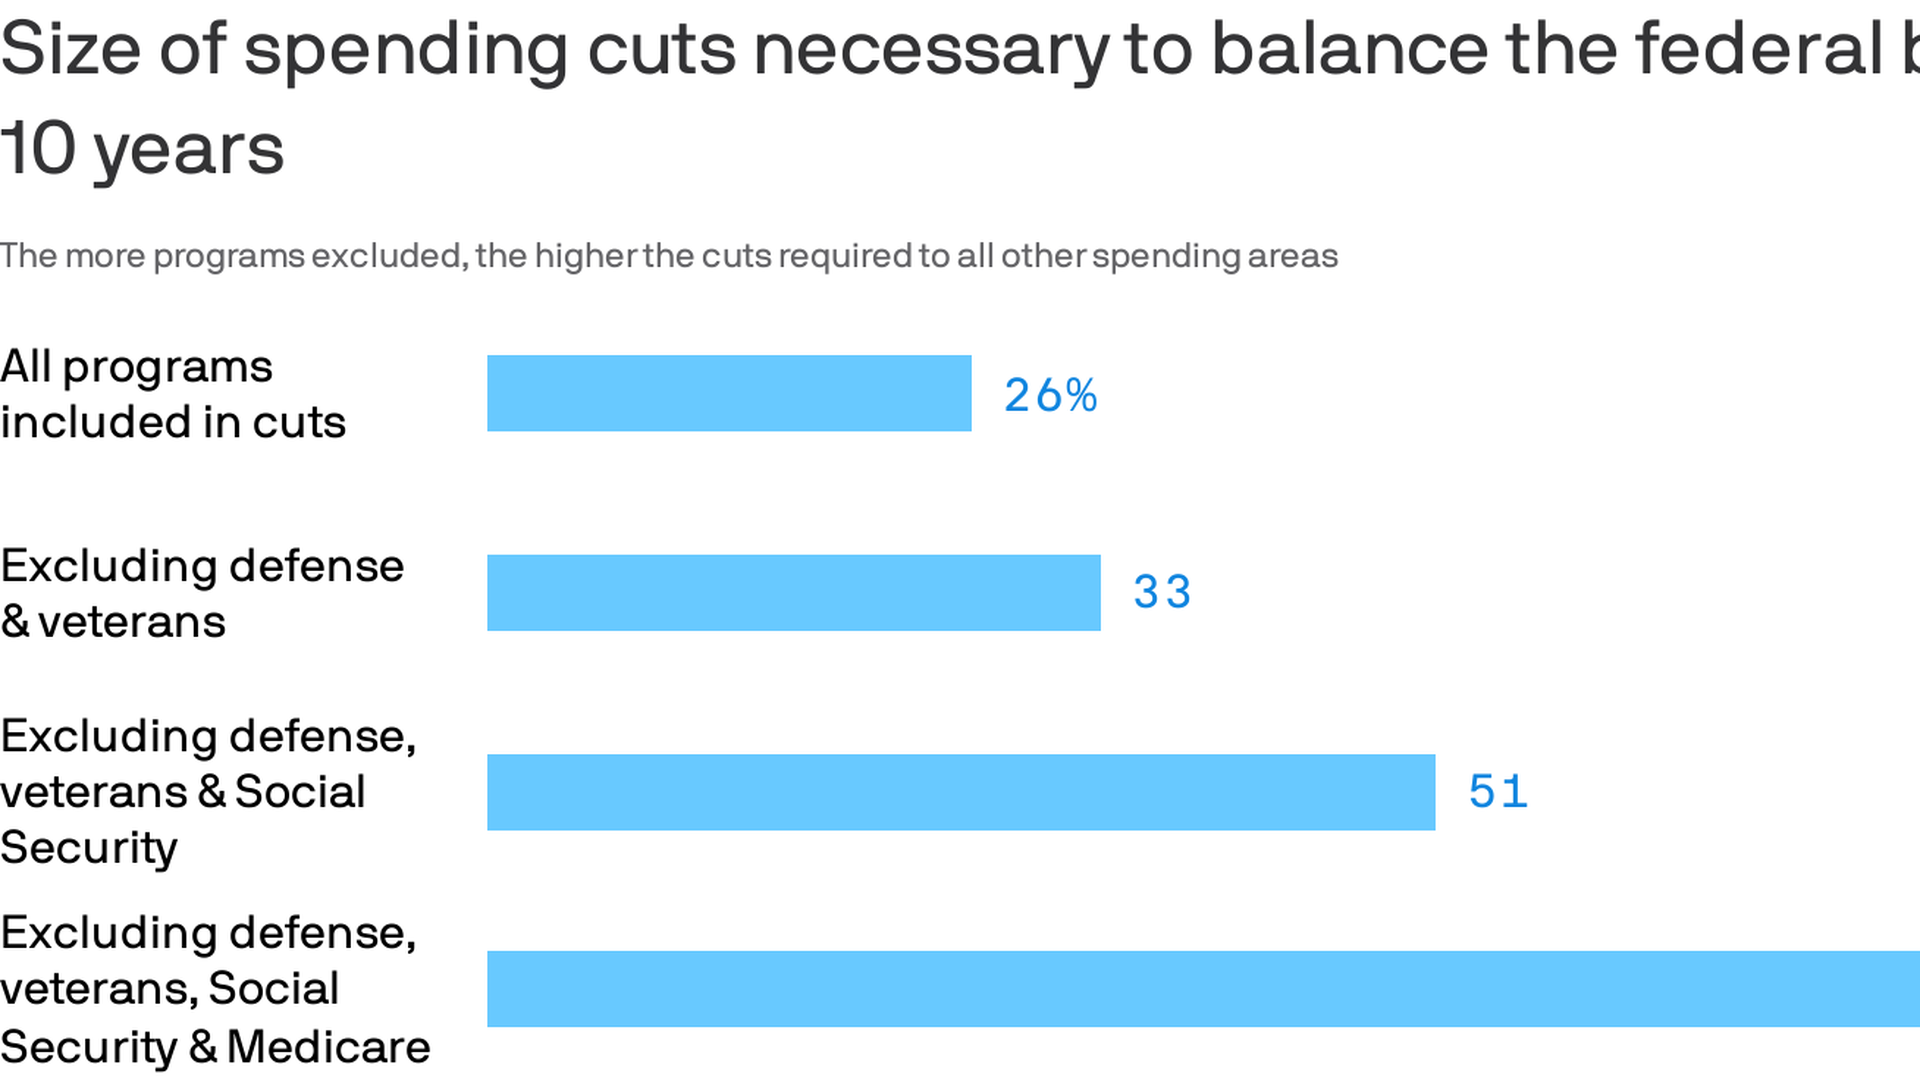 Size of spending cuts necessary to balance the budget